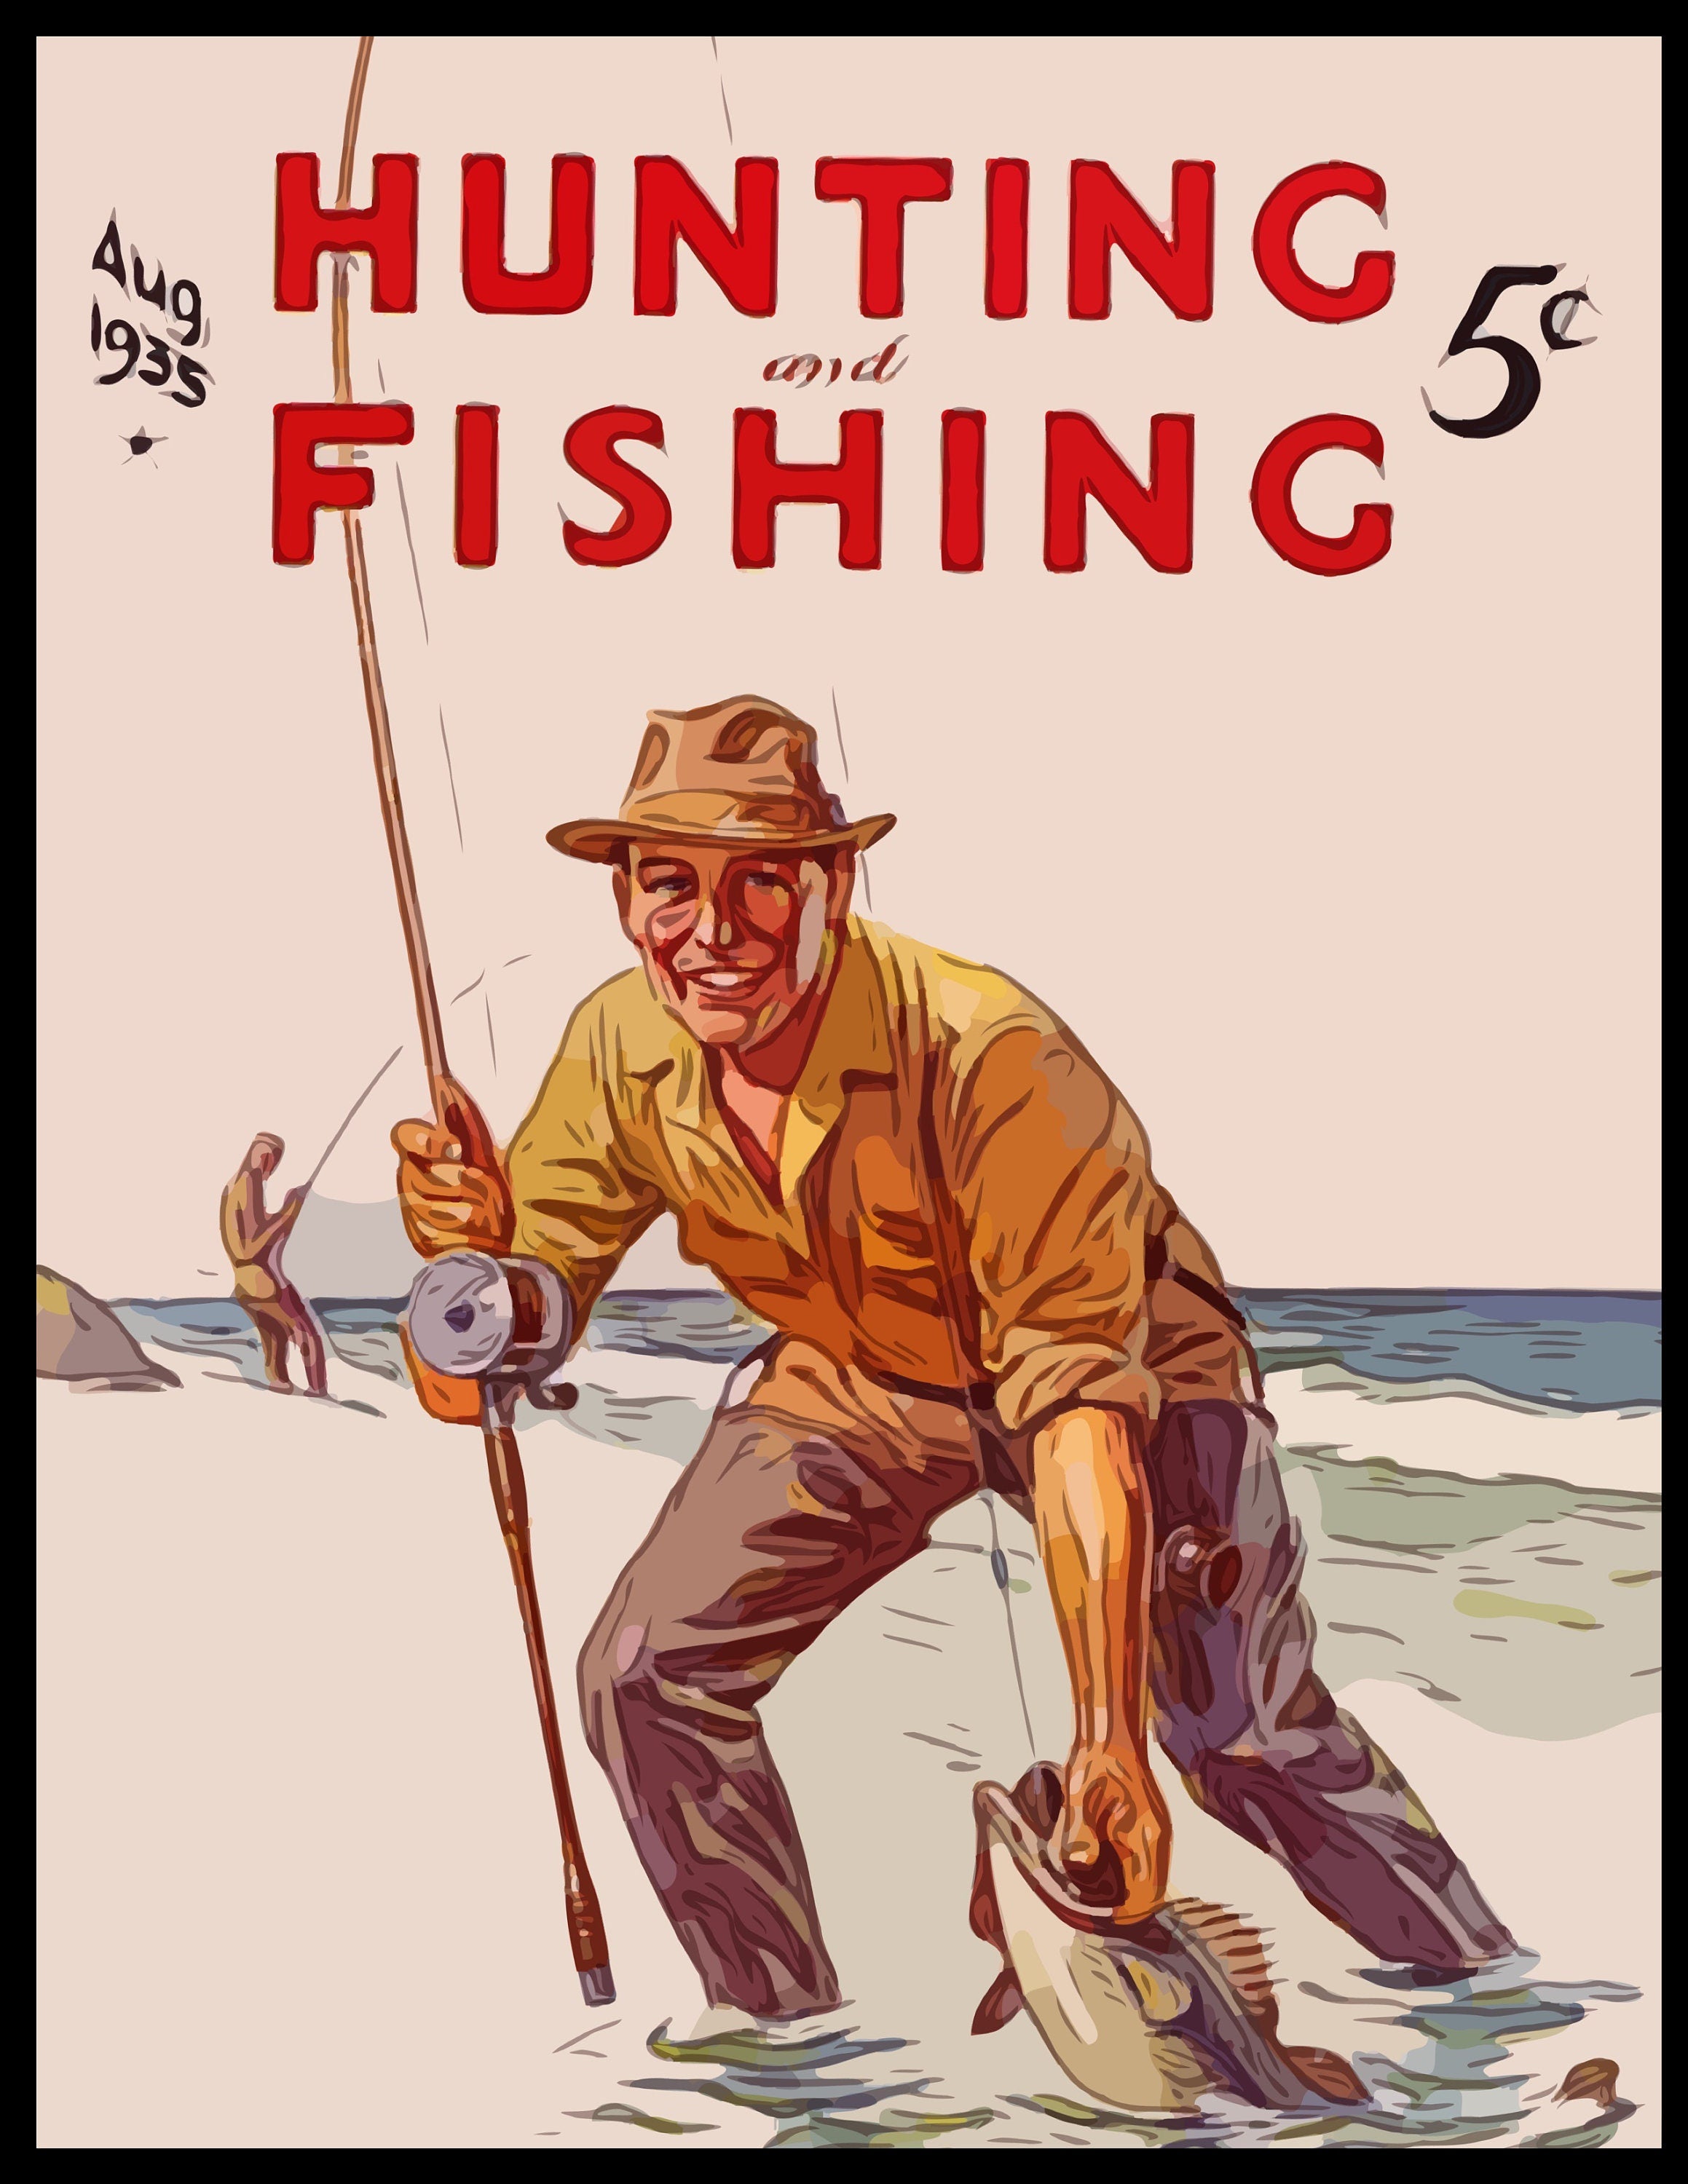 1935 Hunting and Fishing Magazine Cover